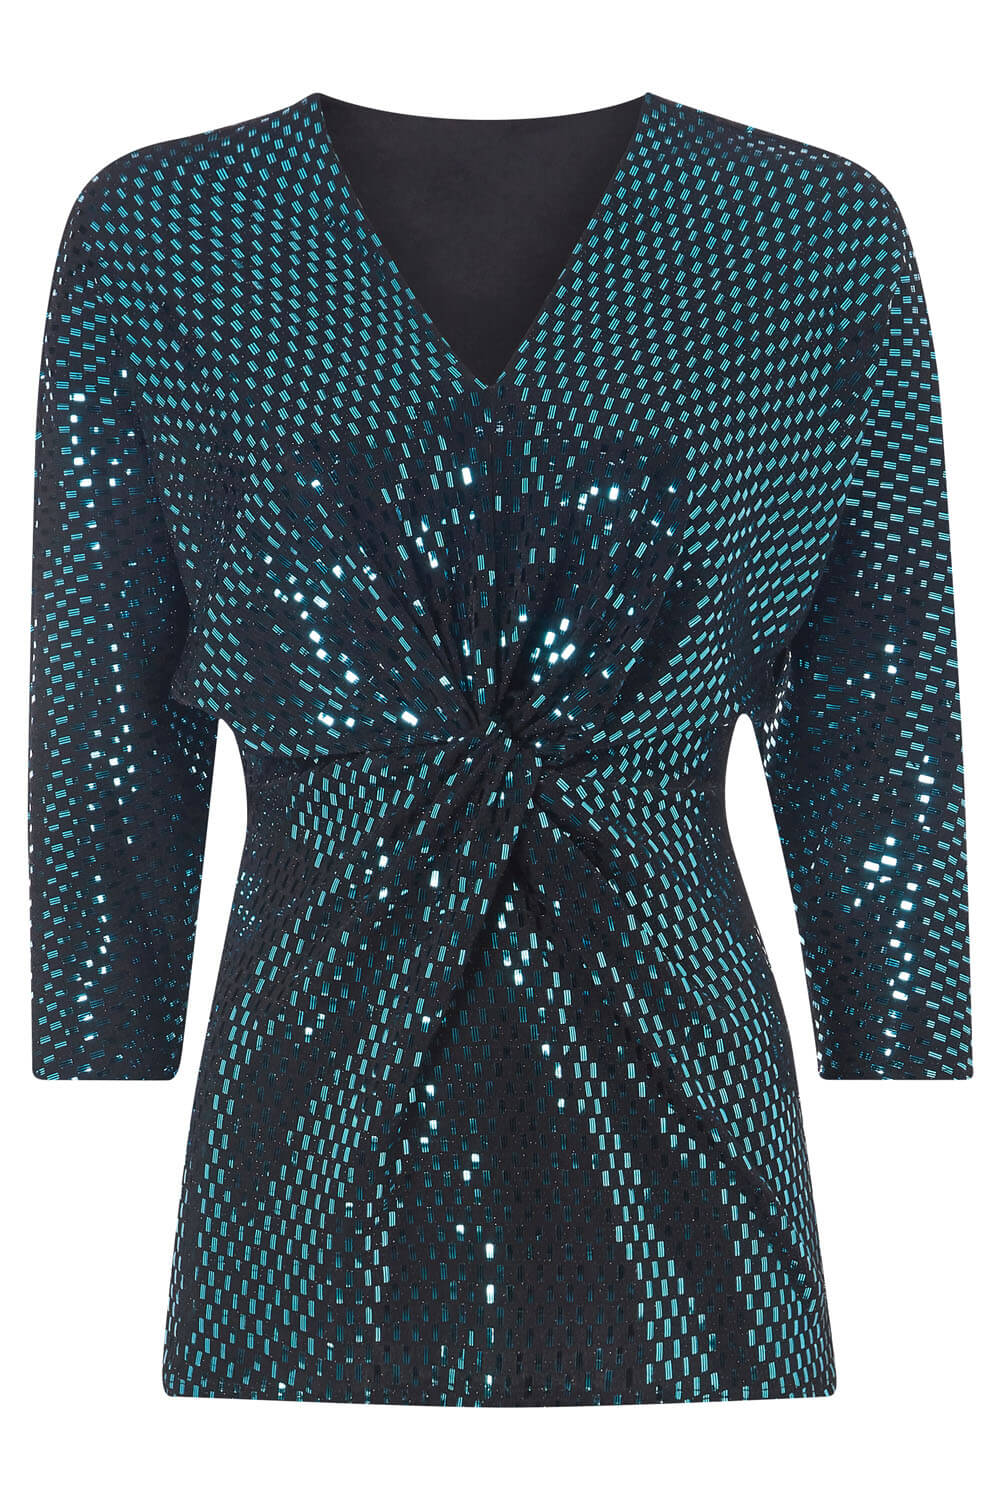 Teal Shimmer Knot Front Top, Image 5 of 5